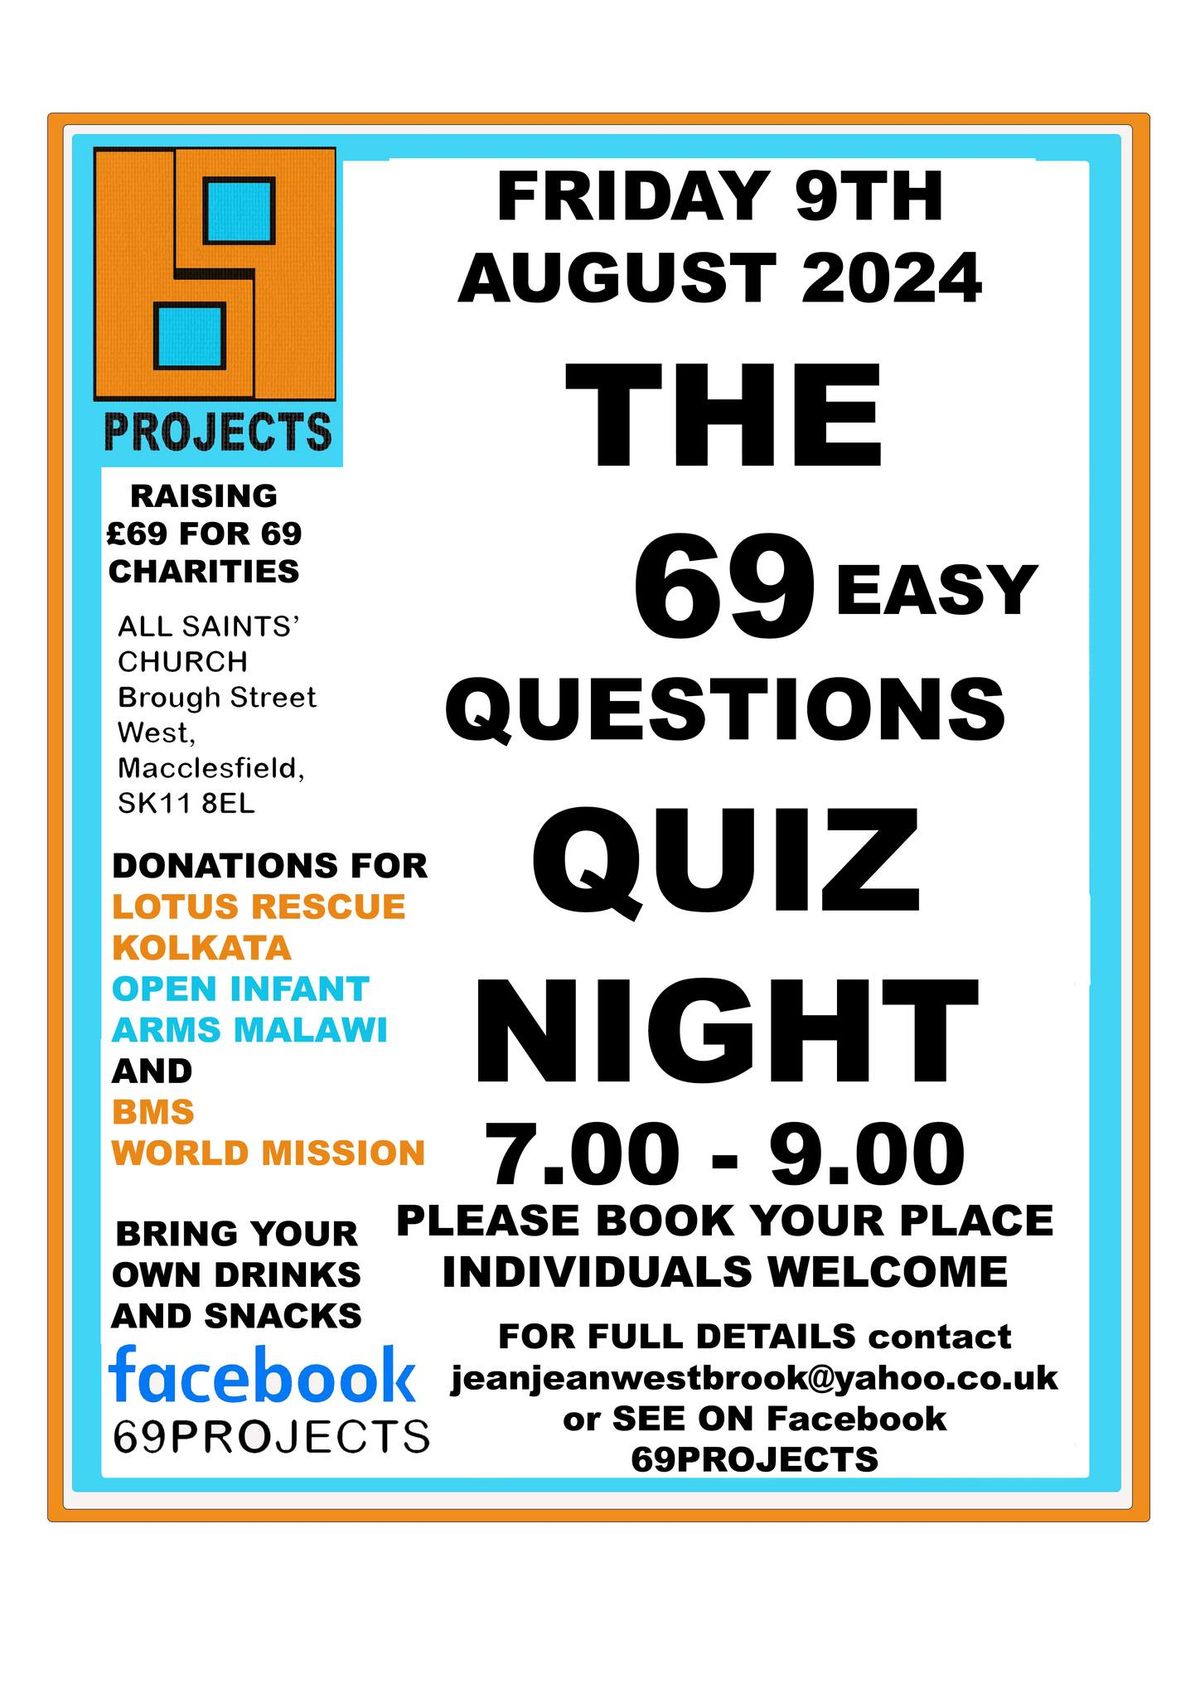 THE 69 (Easy) QUESTIONS QUIZ NIGHT